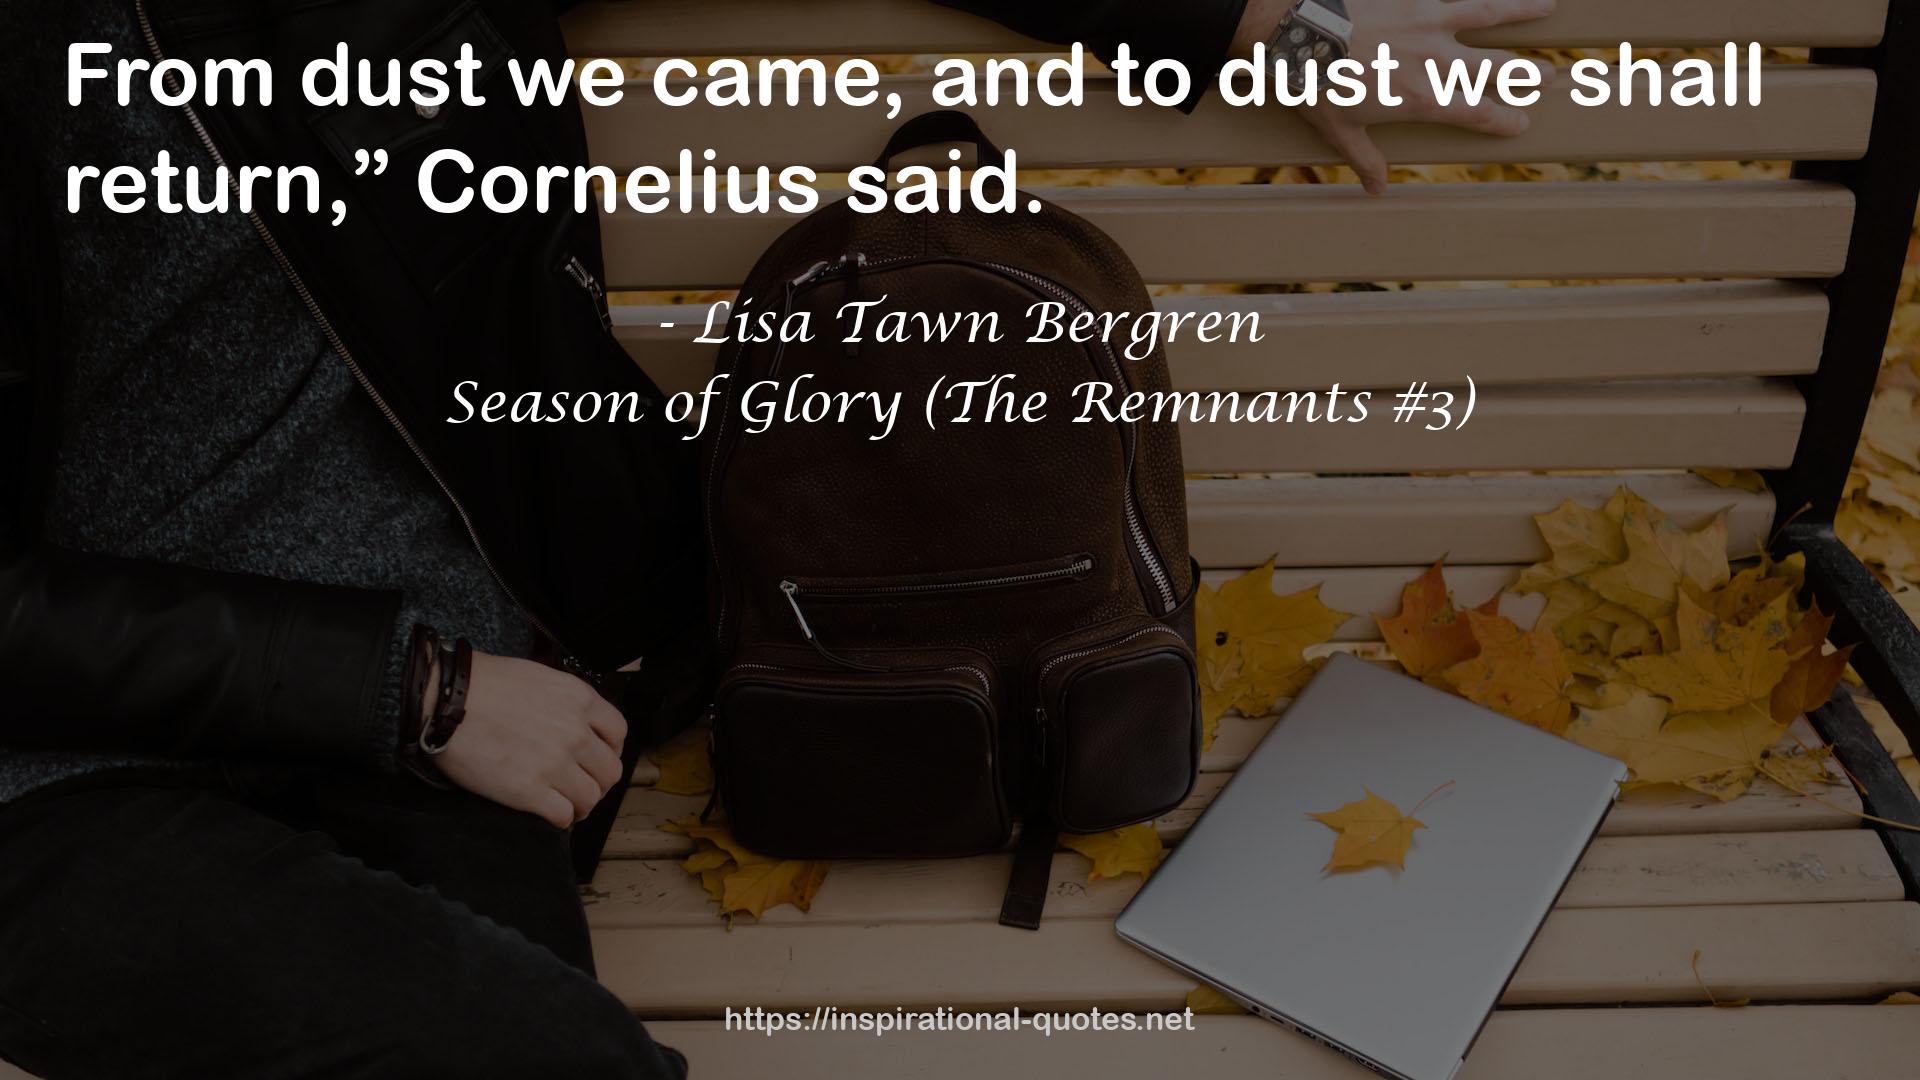 Season of Glory (The Remnants #3) QUOTES